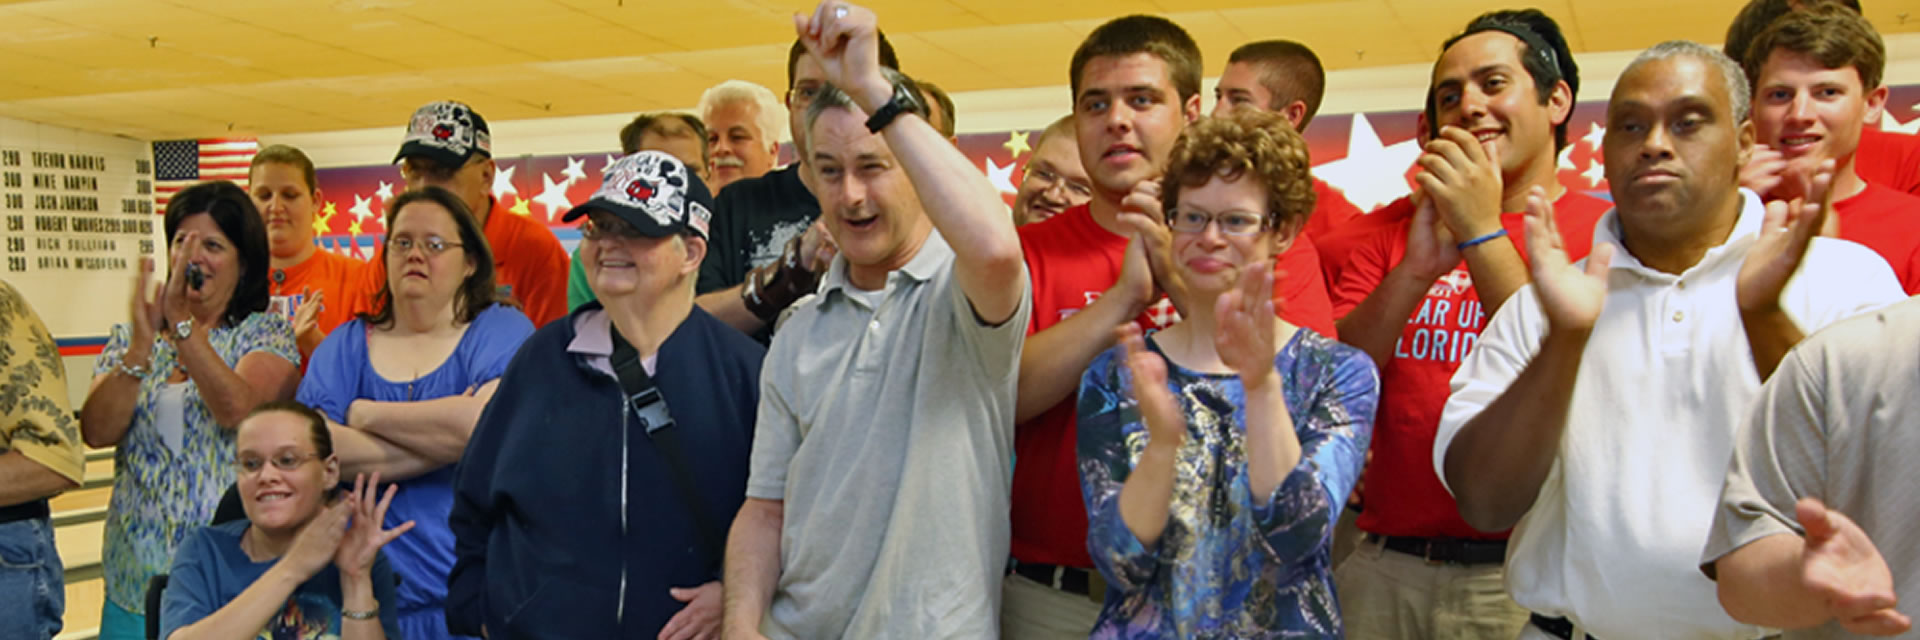 Group of individuals with different abilities cheering